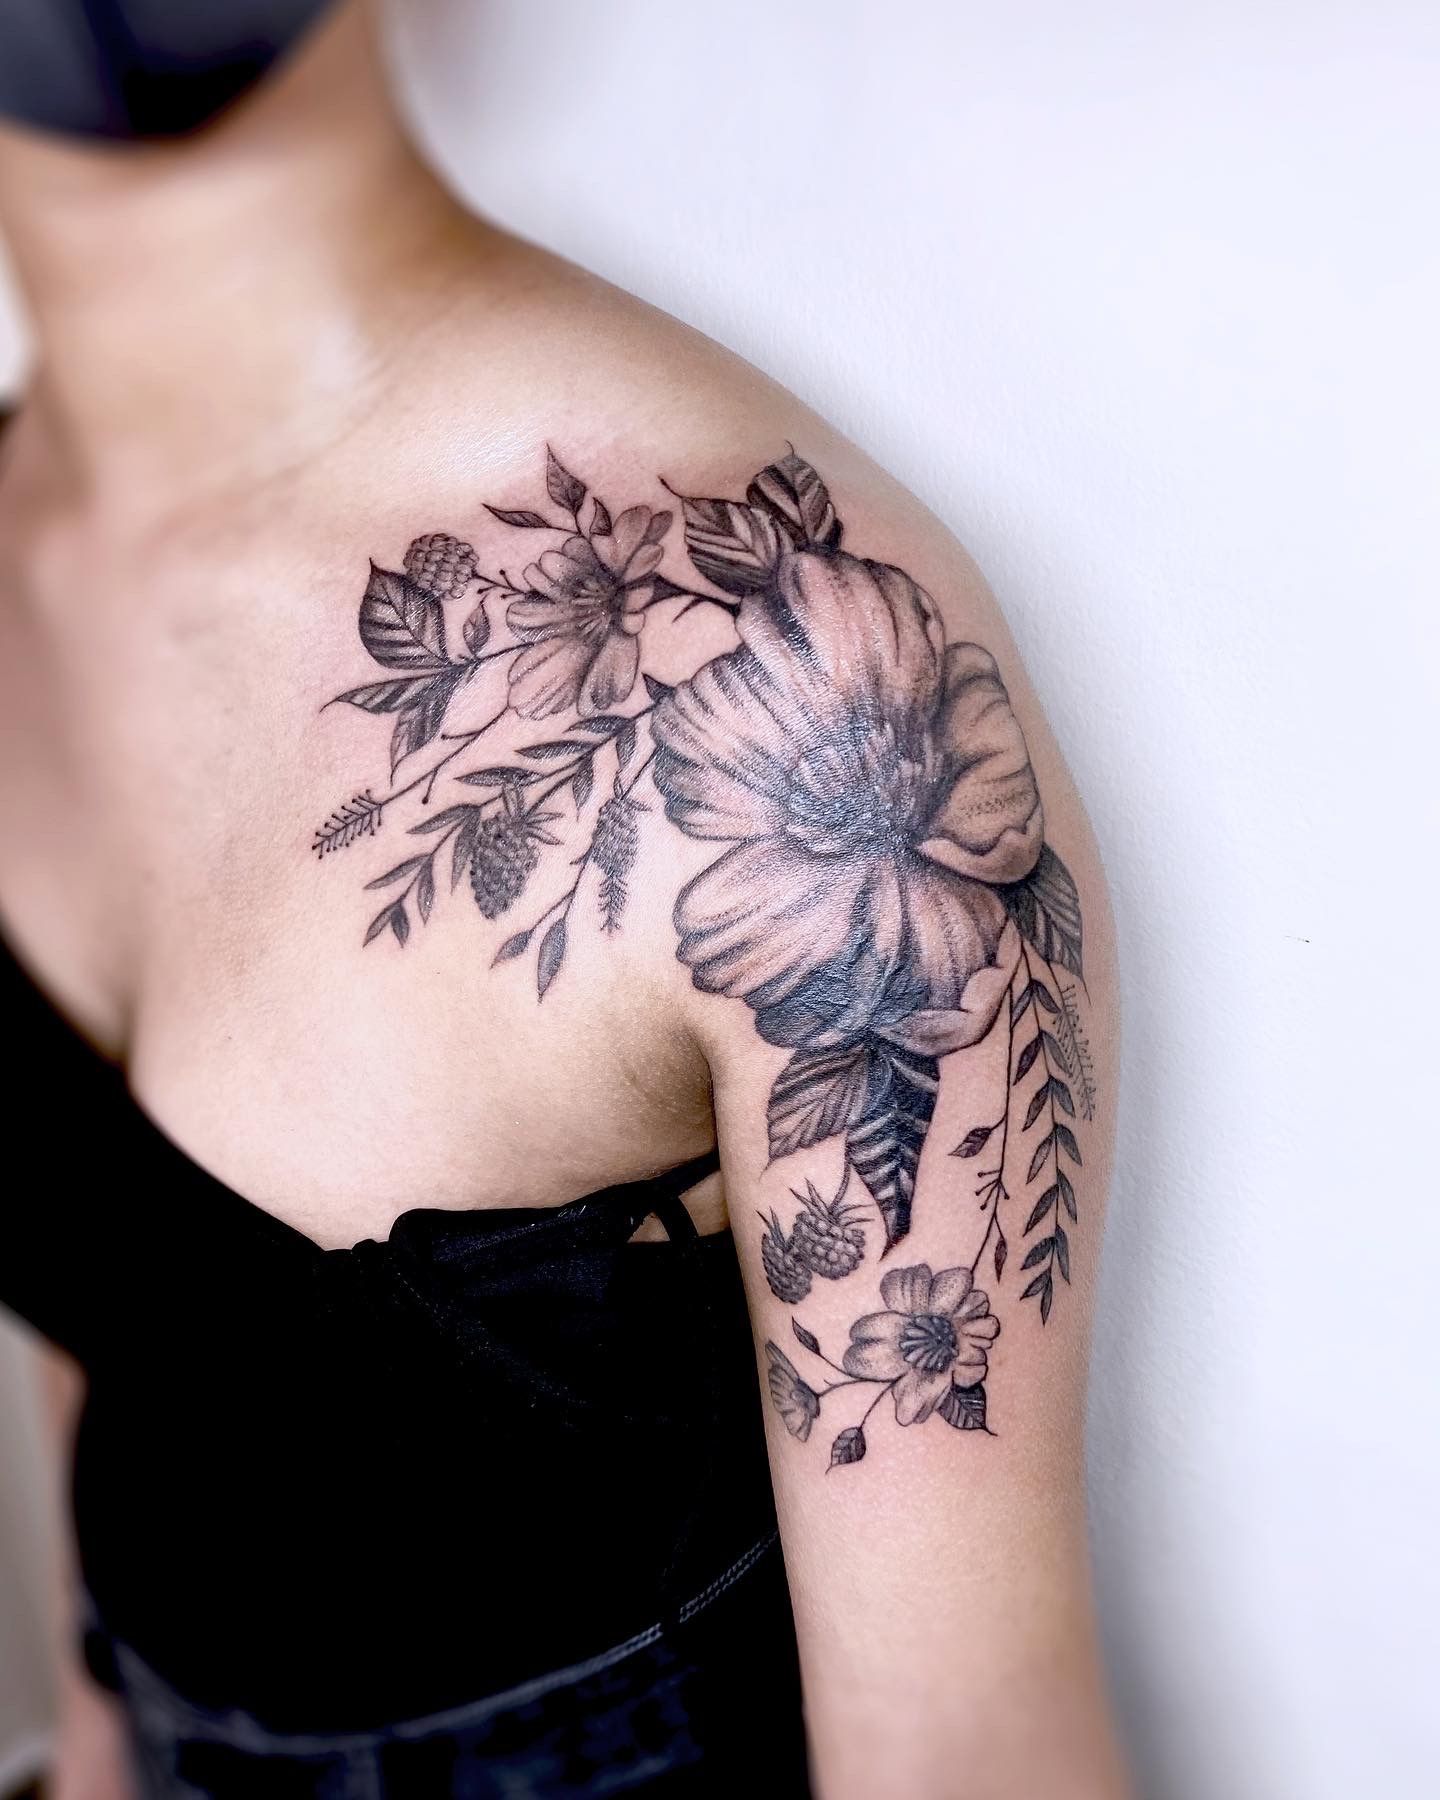 Tattoo uploaded by Brittany Smith  Shoulder blade cover up flower tattoo  tattoo repair  Tattoodo